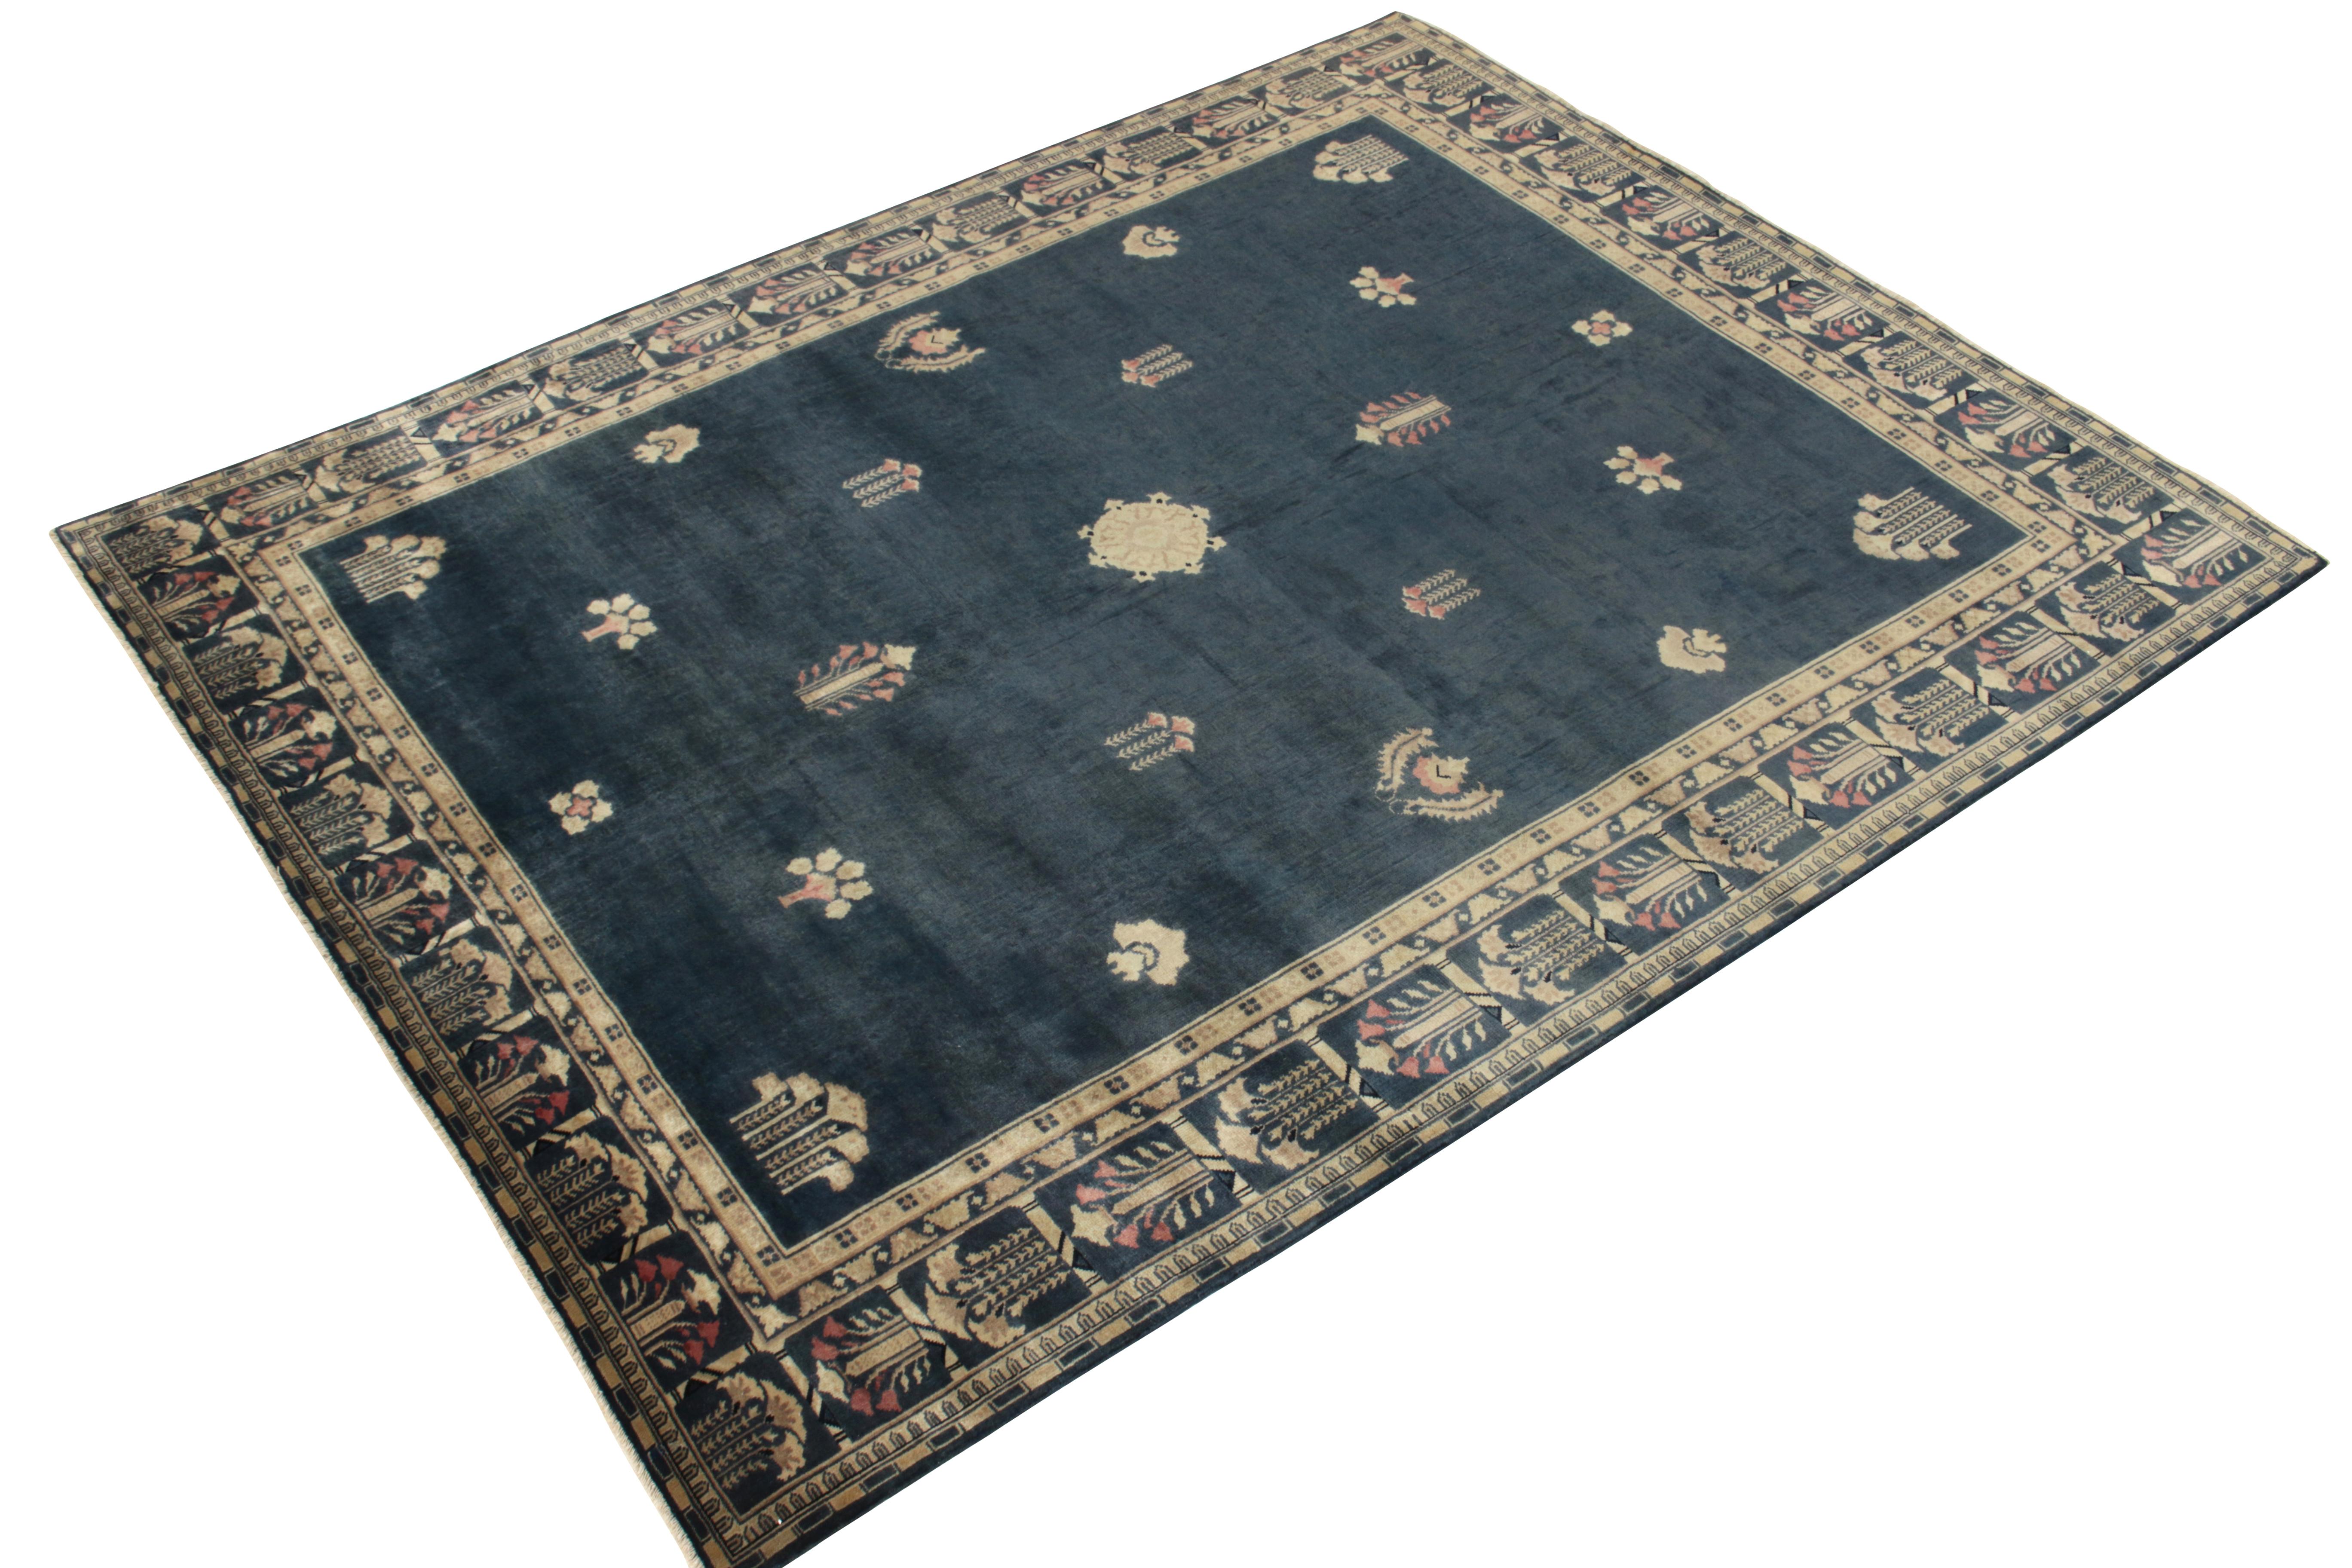 Art Deco Vintage Chinese Deco Style Rug in Blue Beige-Brown Floral Pattern by Rug & Kilim For Sale